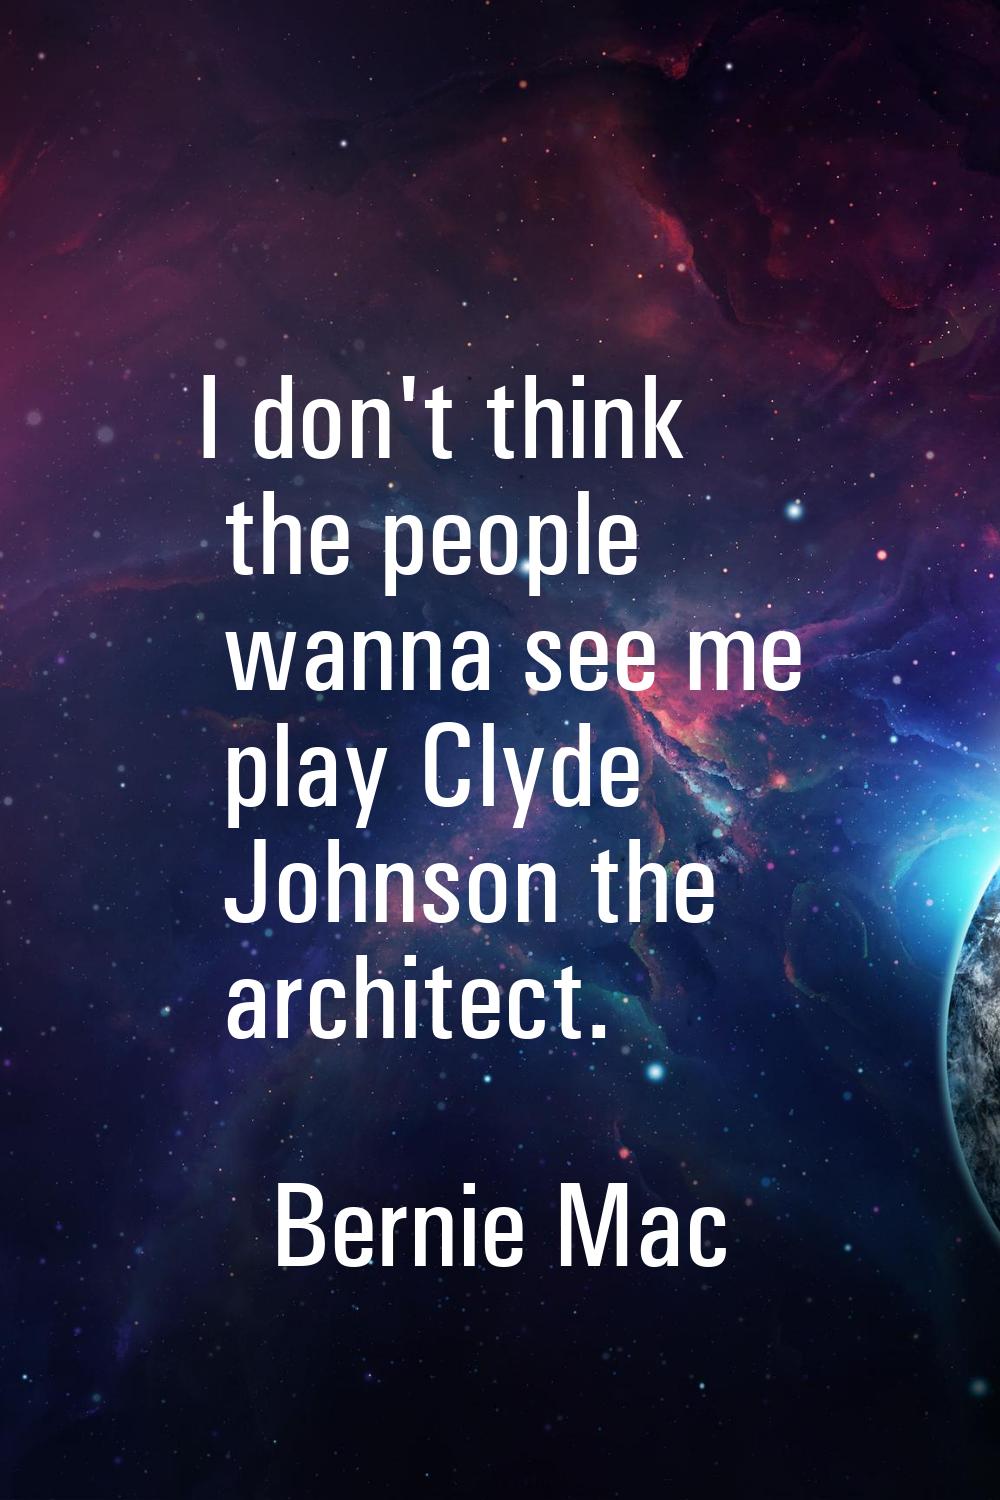 I don't think the people wanna see me play Clyde Johnson the architect.